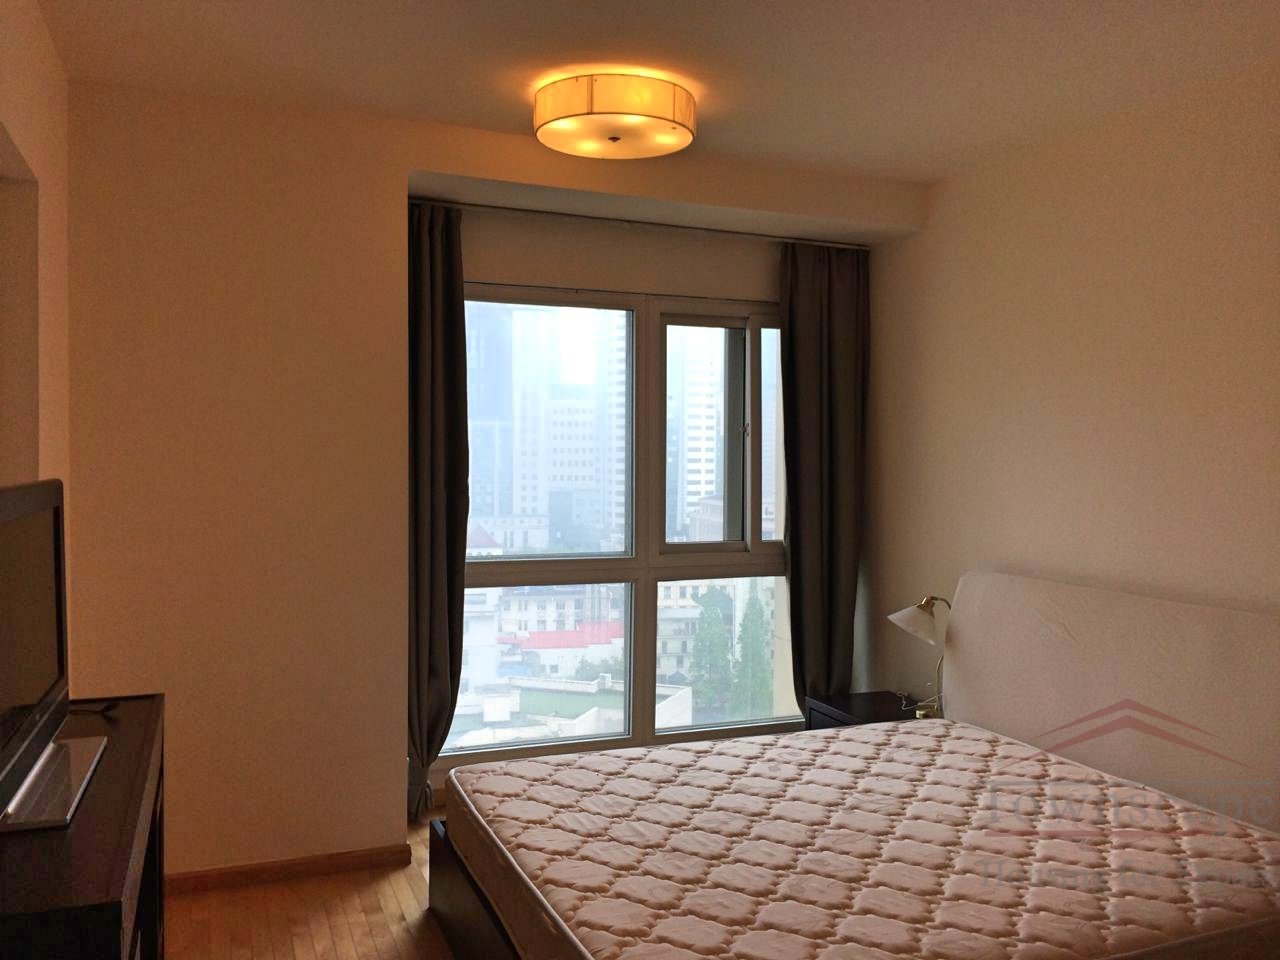 Shanghai 3br apartment 3BR Apartment nr Jingan Temple, clubhouse included